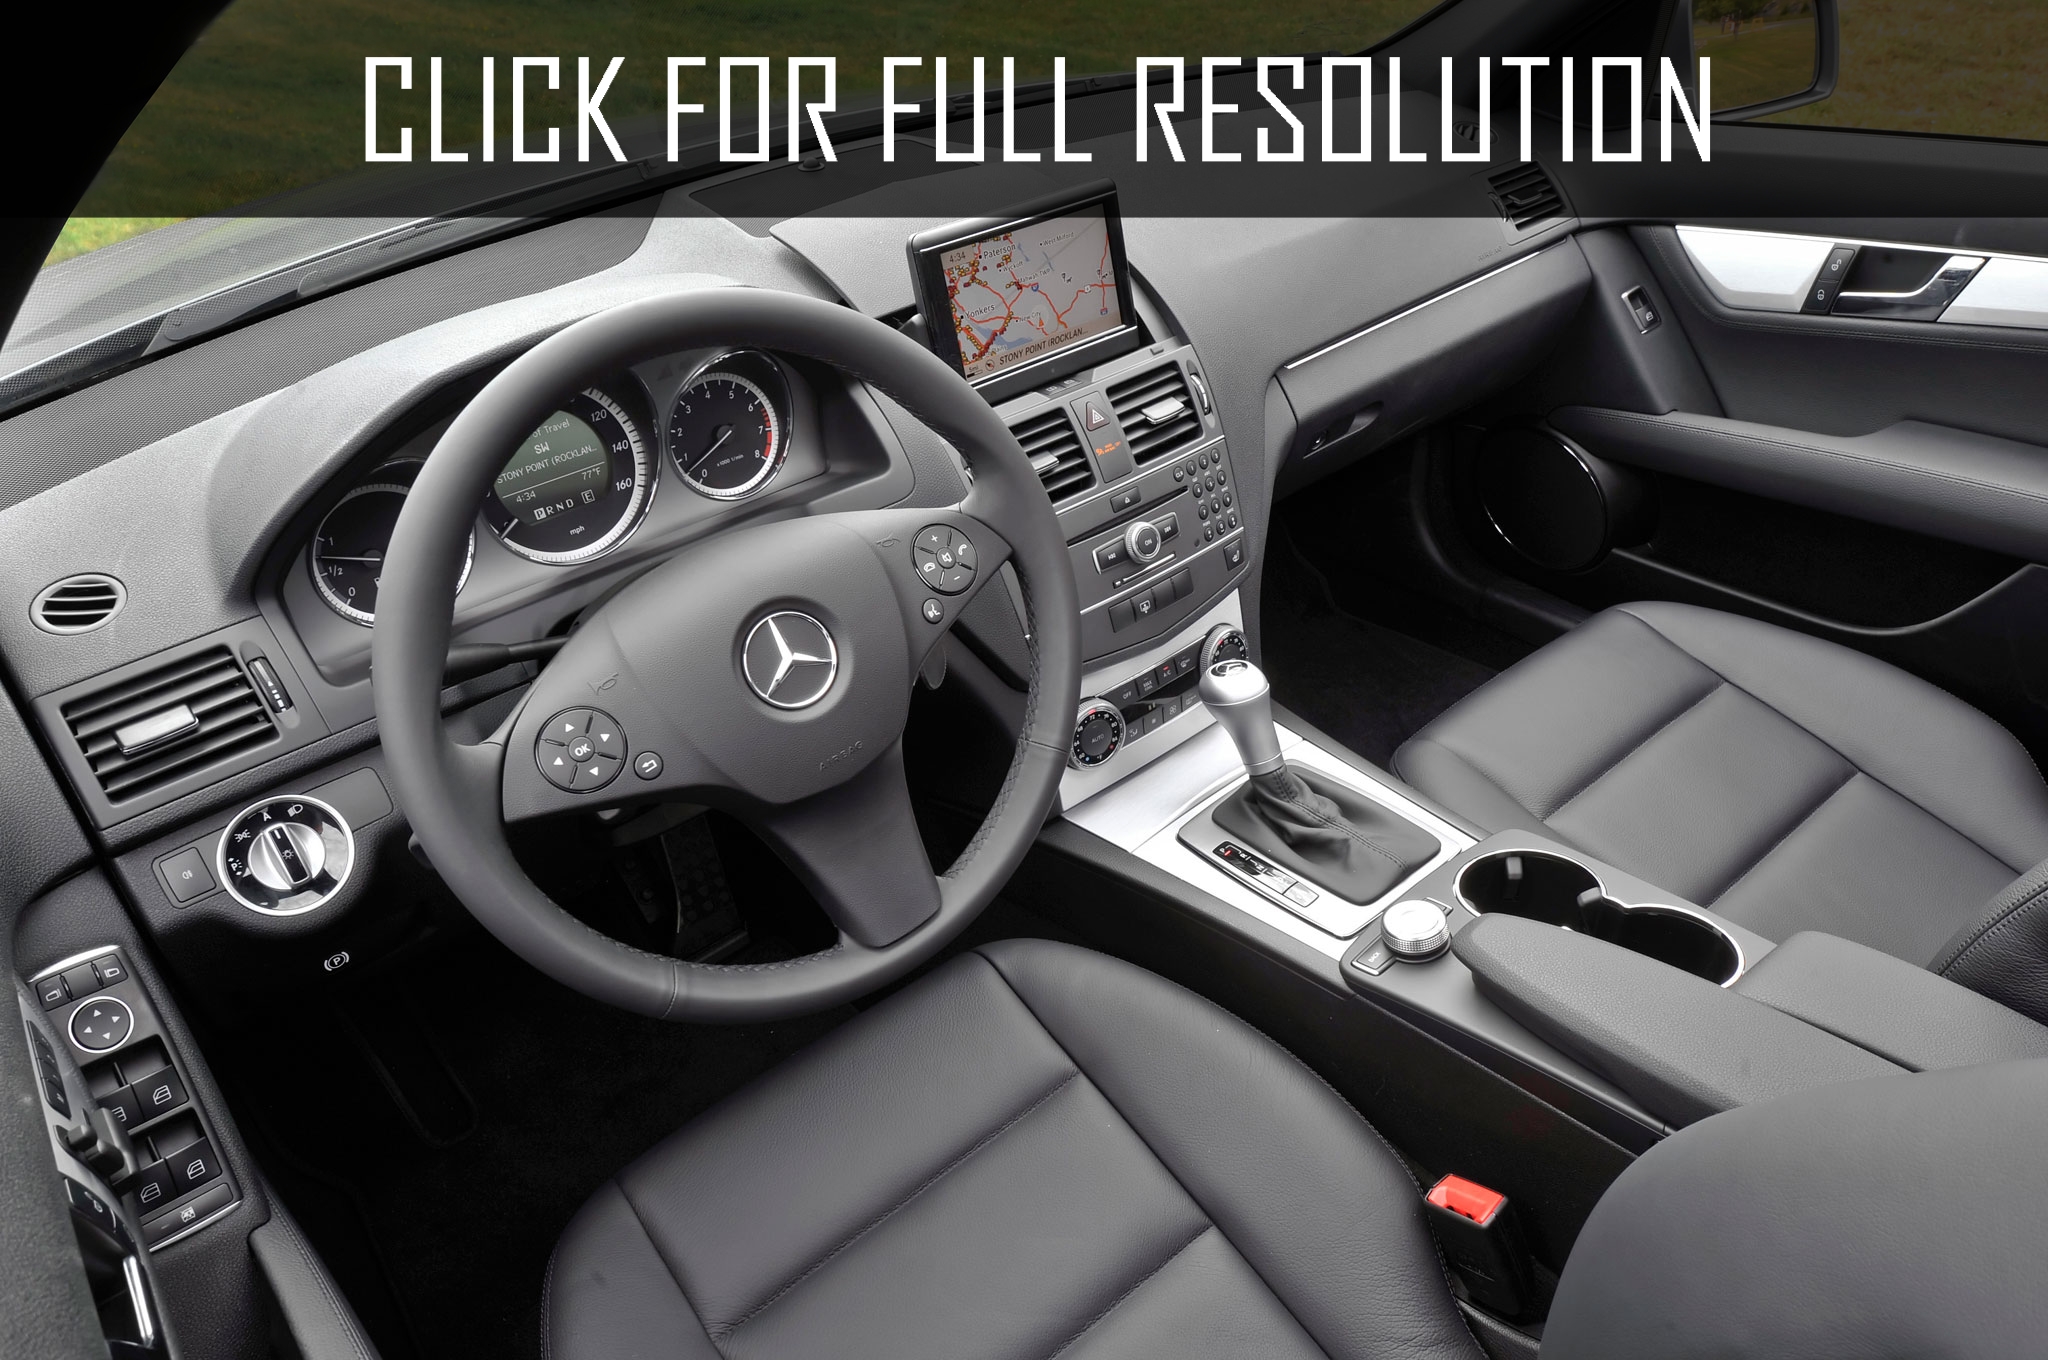 Mercedes Benz C300 2011 Reviews Prices Ratings With